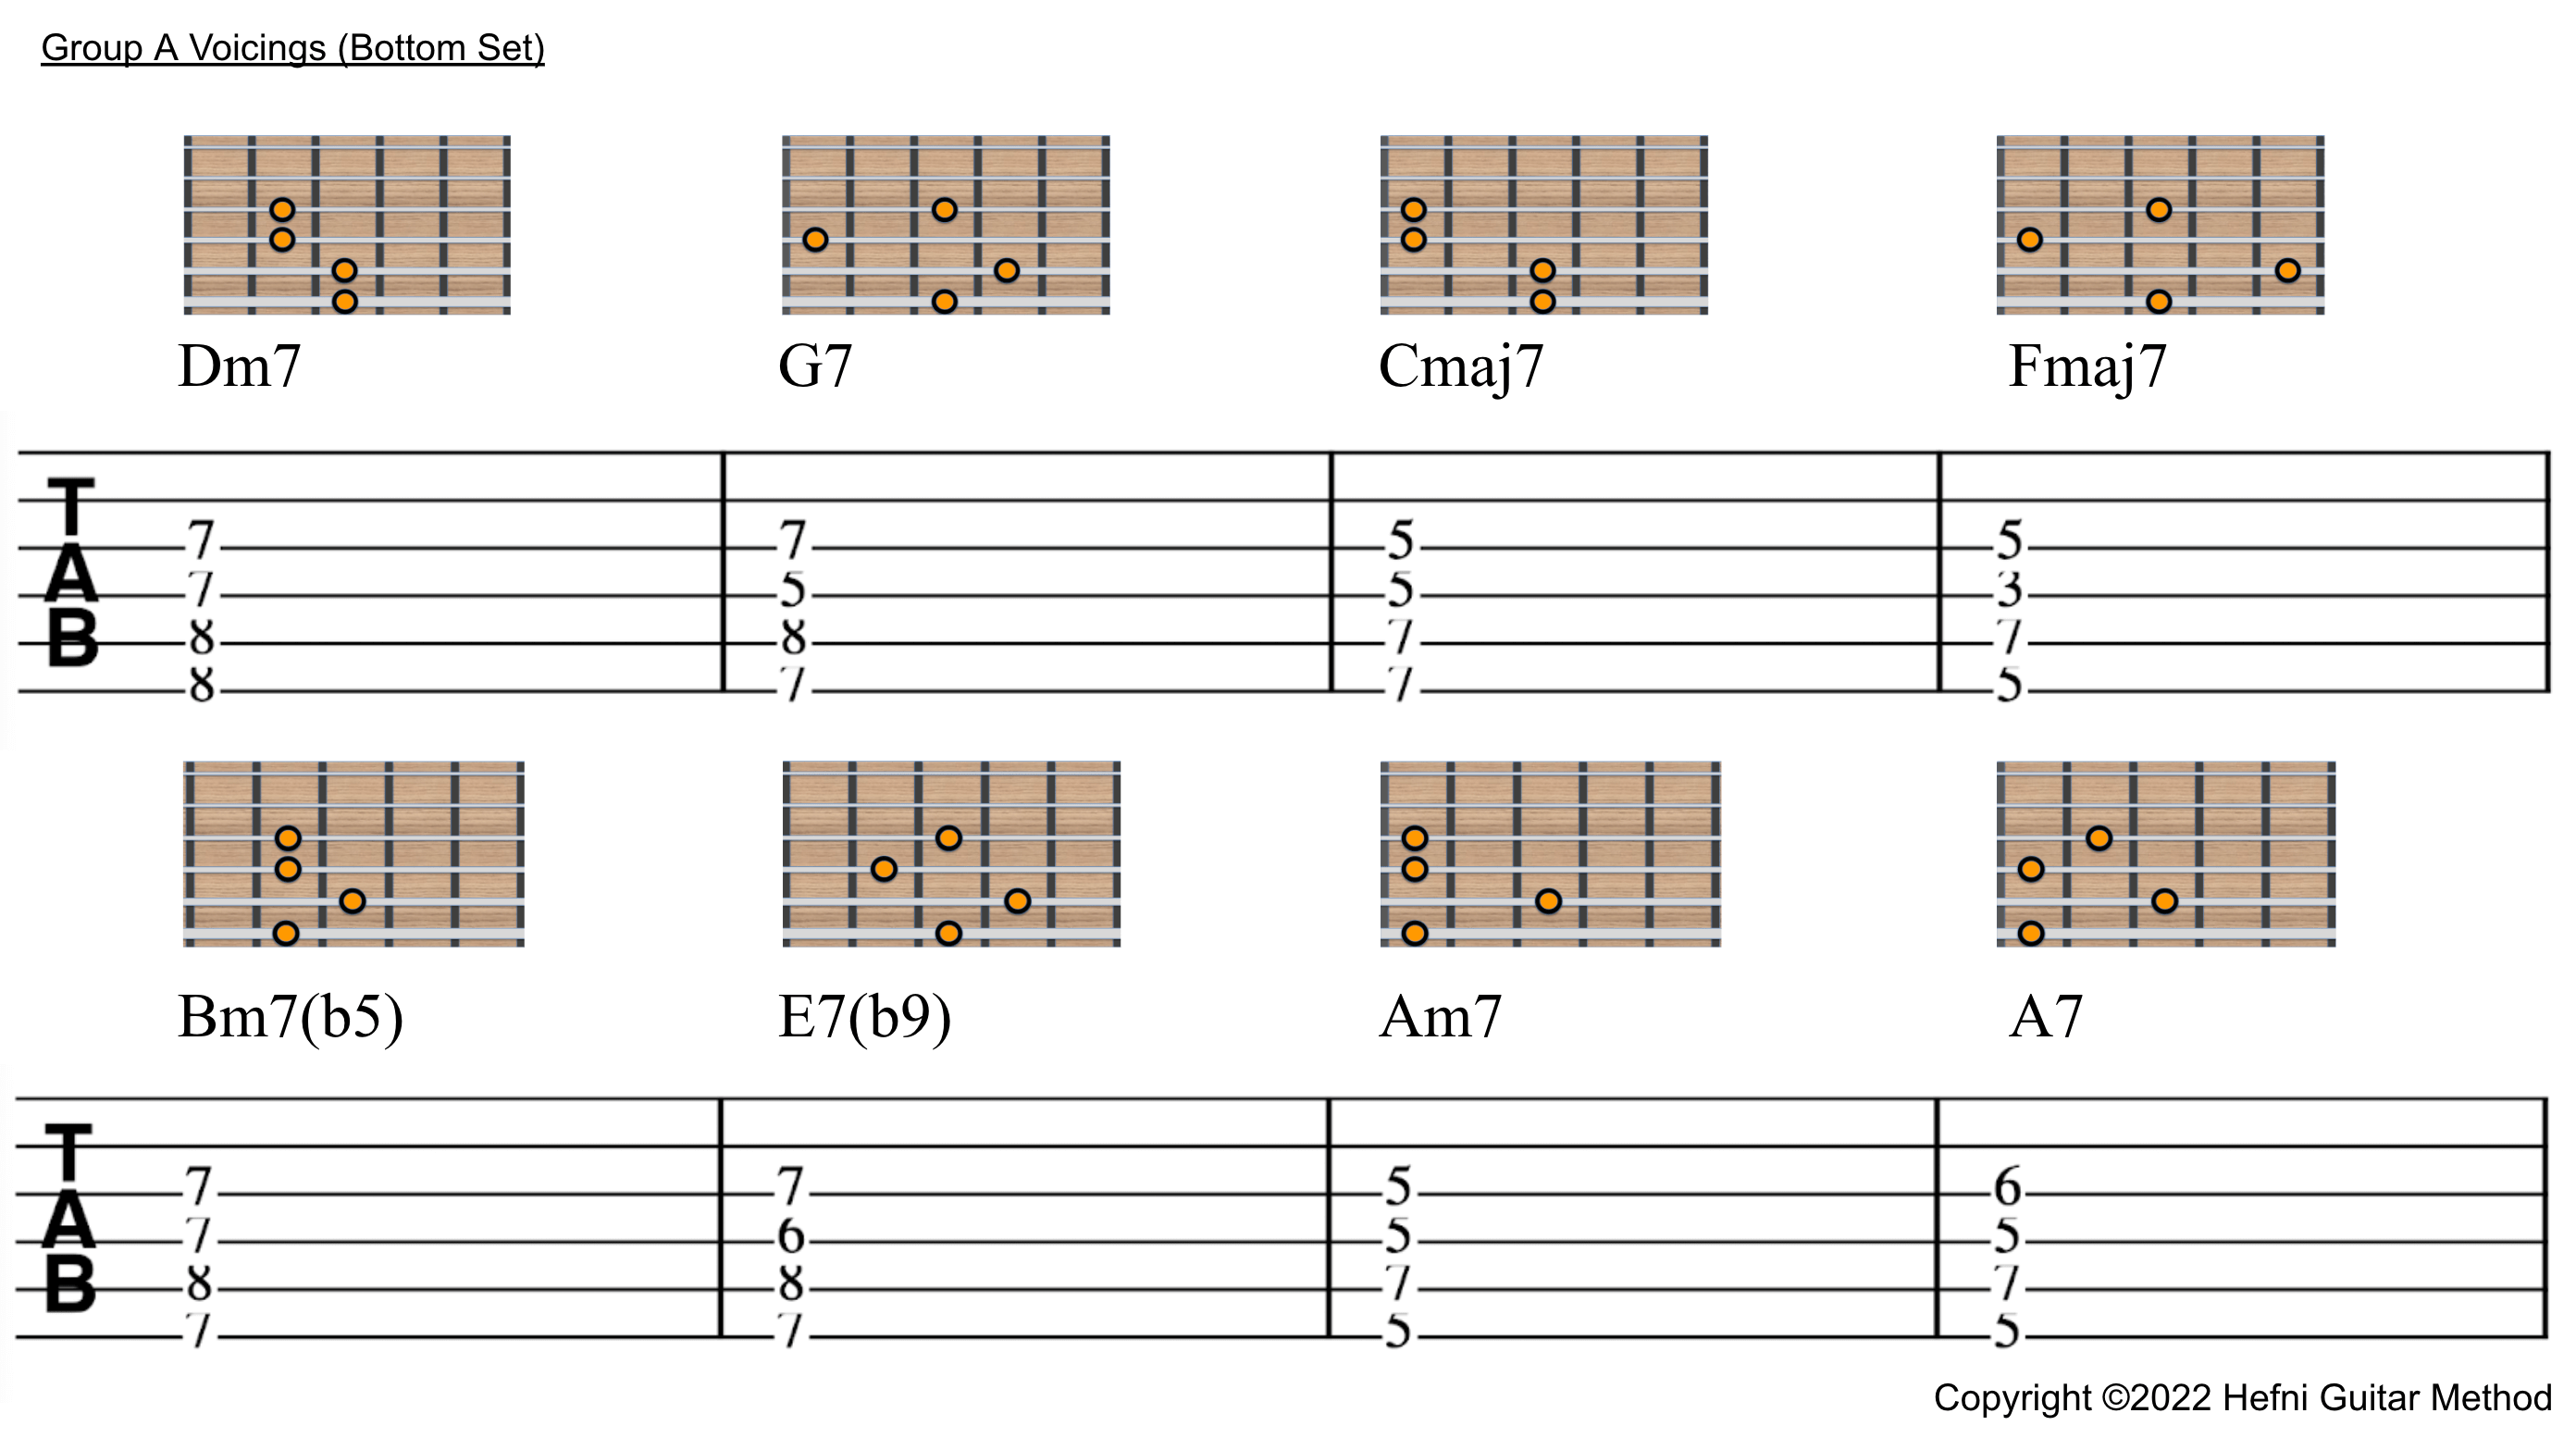 10. Jazz Group A Voicings (Bottom Set)